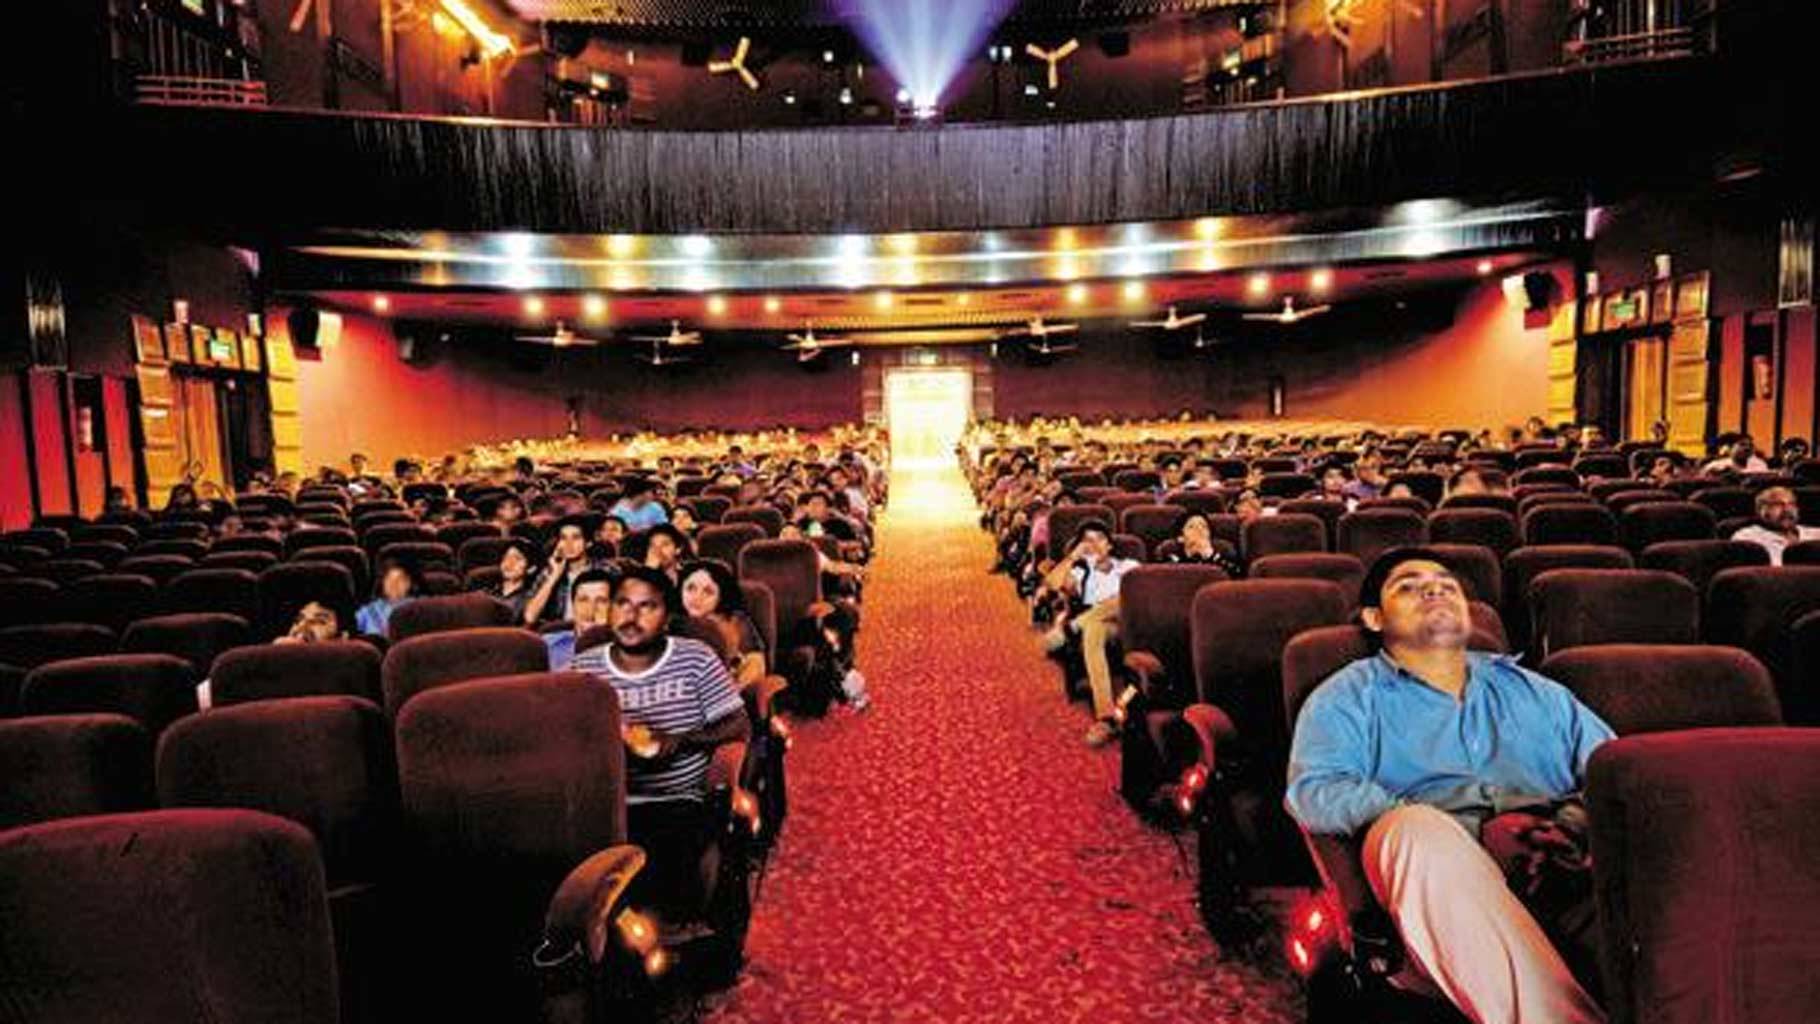 new covid-19 guideline in delhi, theaters will open with full capacity